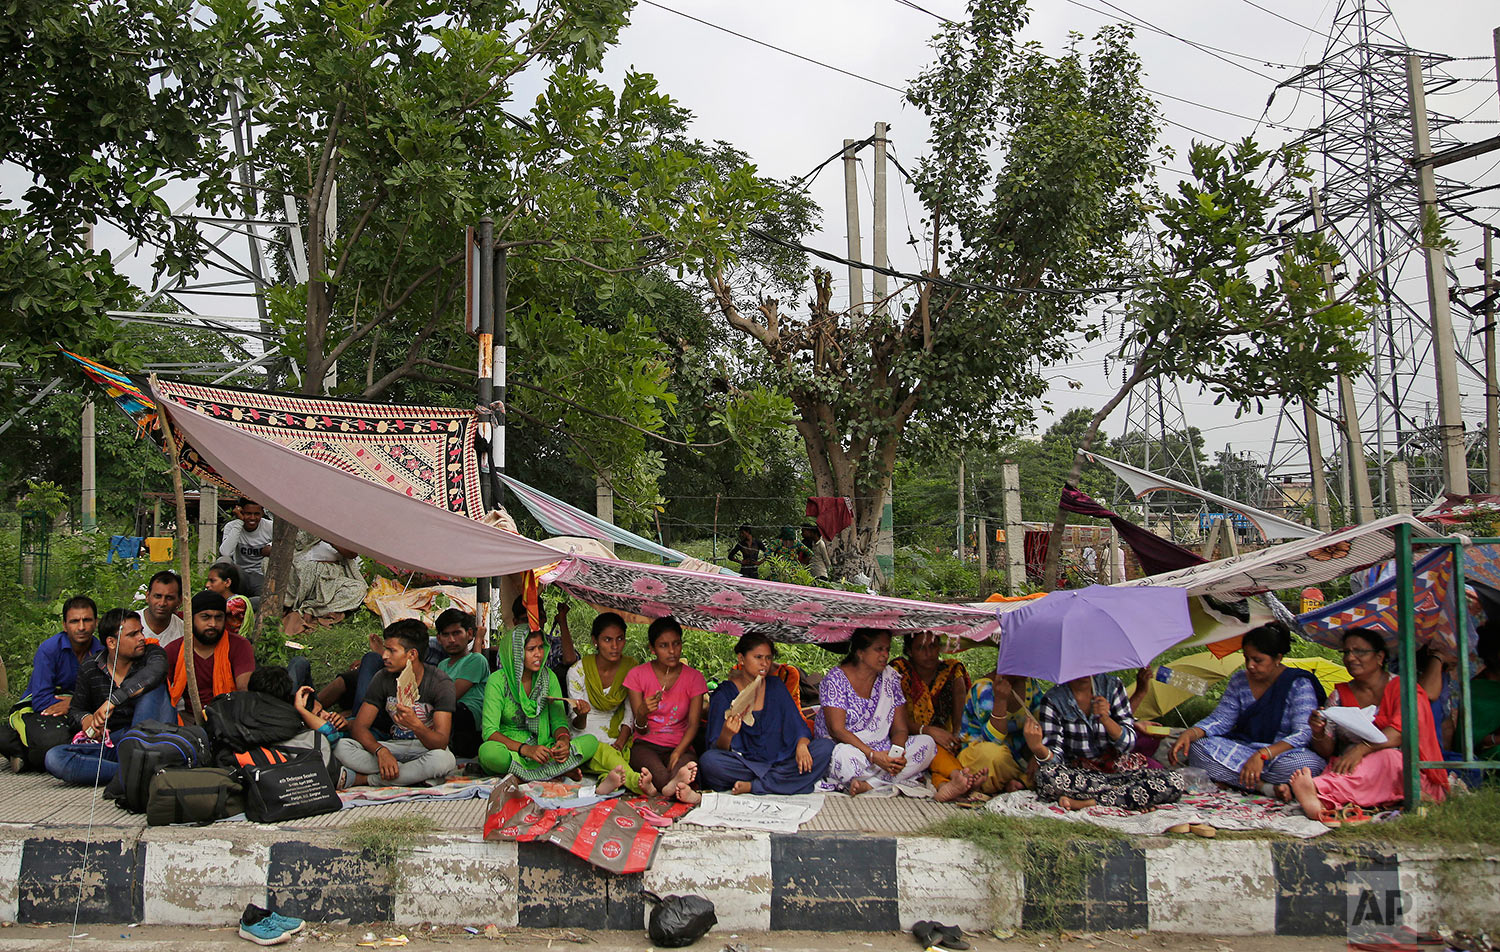  Supporters of the Dera Sacha Sauda sect squat on the roadside leading to an Indian court in Panchkula, India, Thursday, Aug. 24, 2017. (AP Photo/Altaf Qadri) 